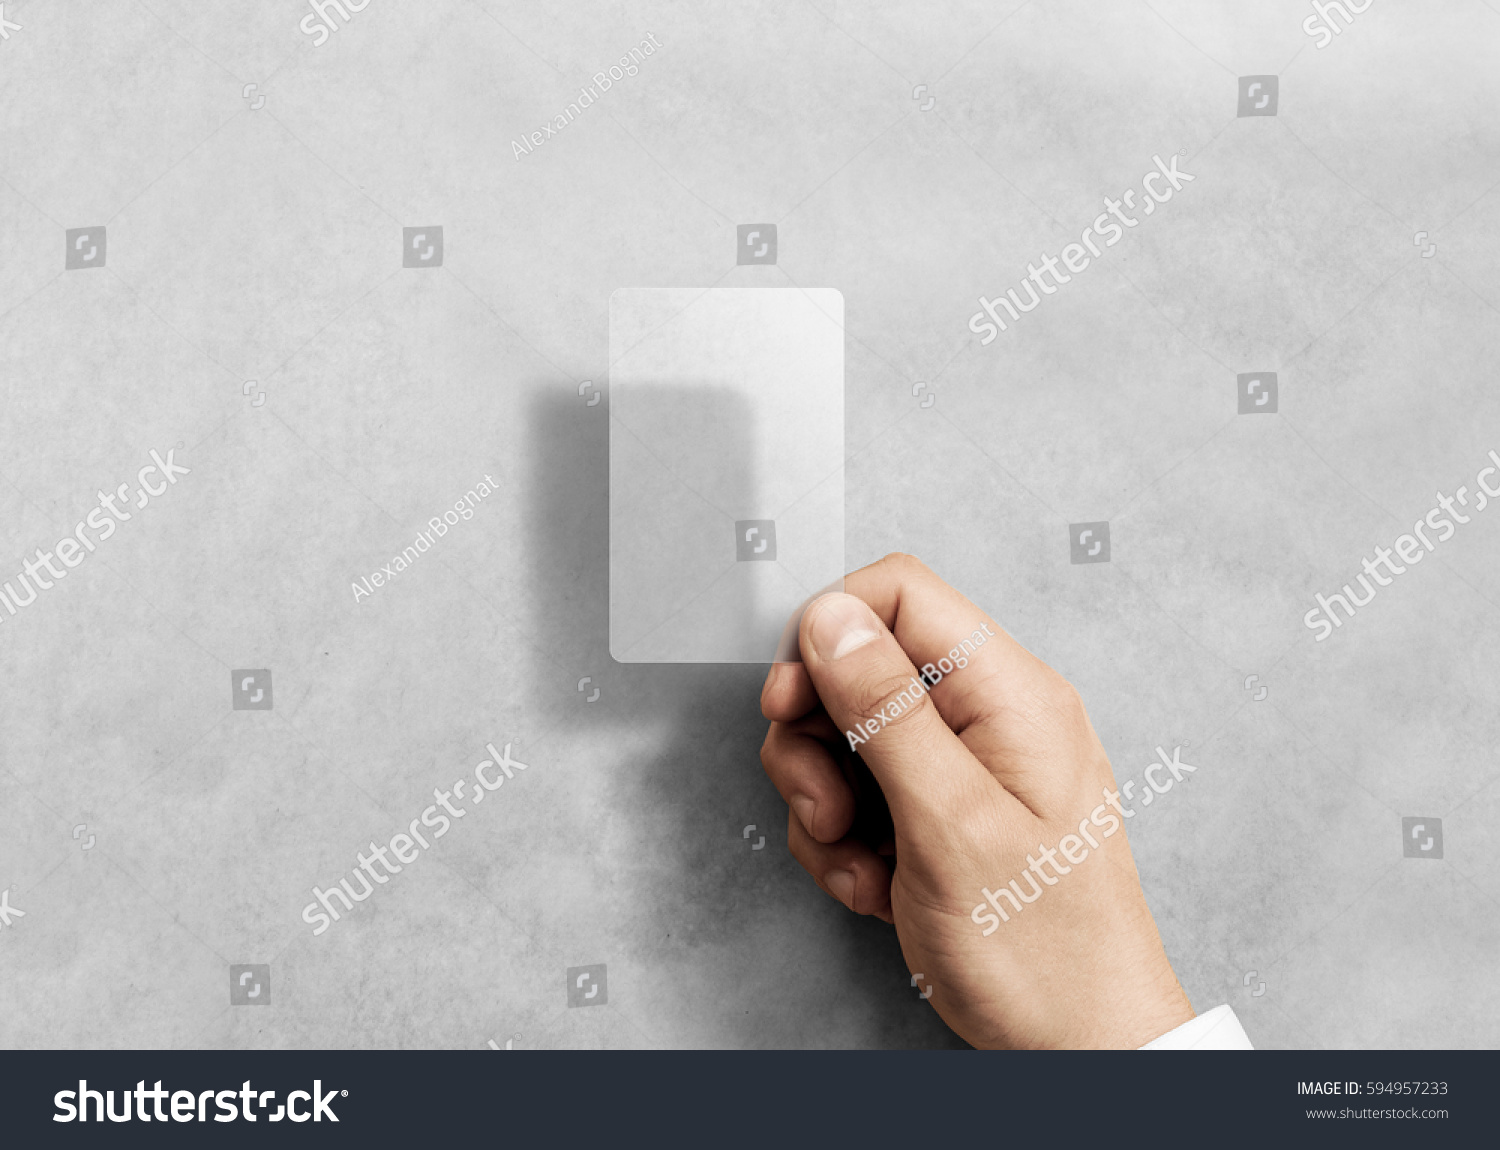 Hand hold blank vertical translucent card mockup with rounded corners. Plain clear call-card mock up template holding arm. Plastic transparent acrylic namecard display front. #594957233